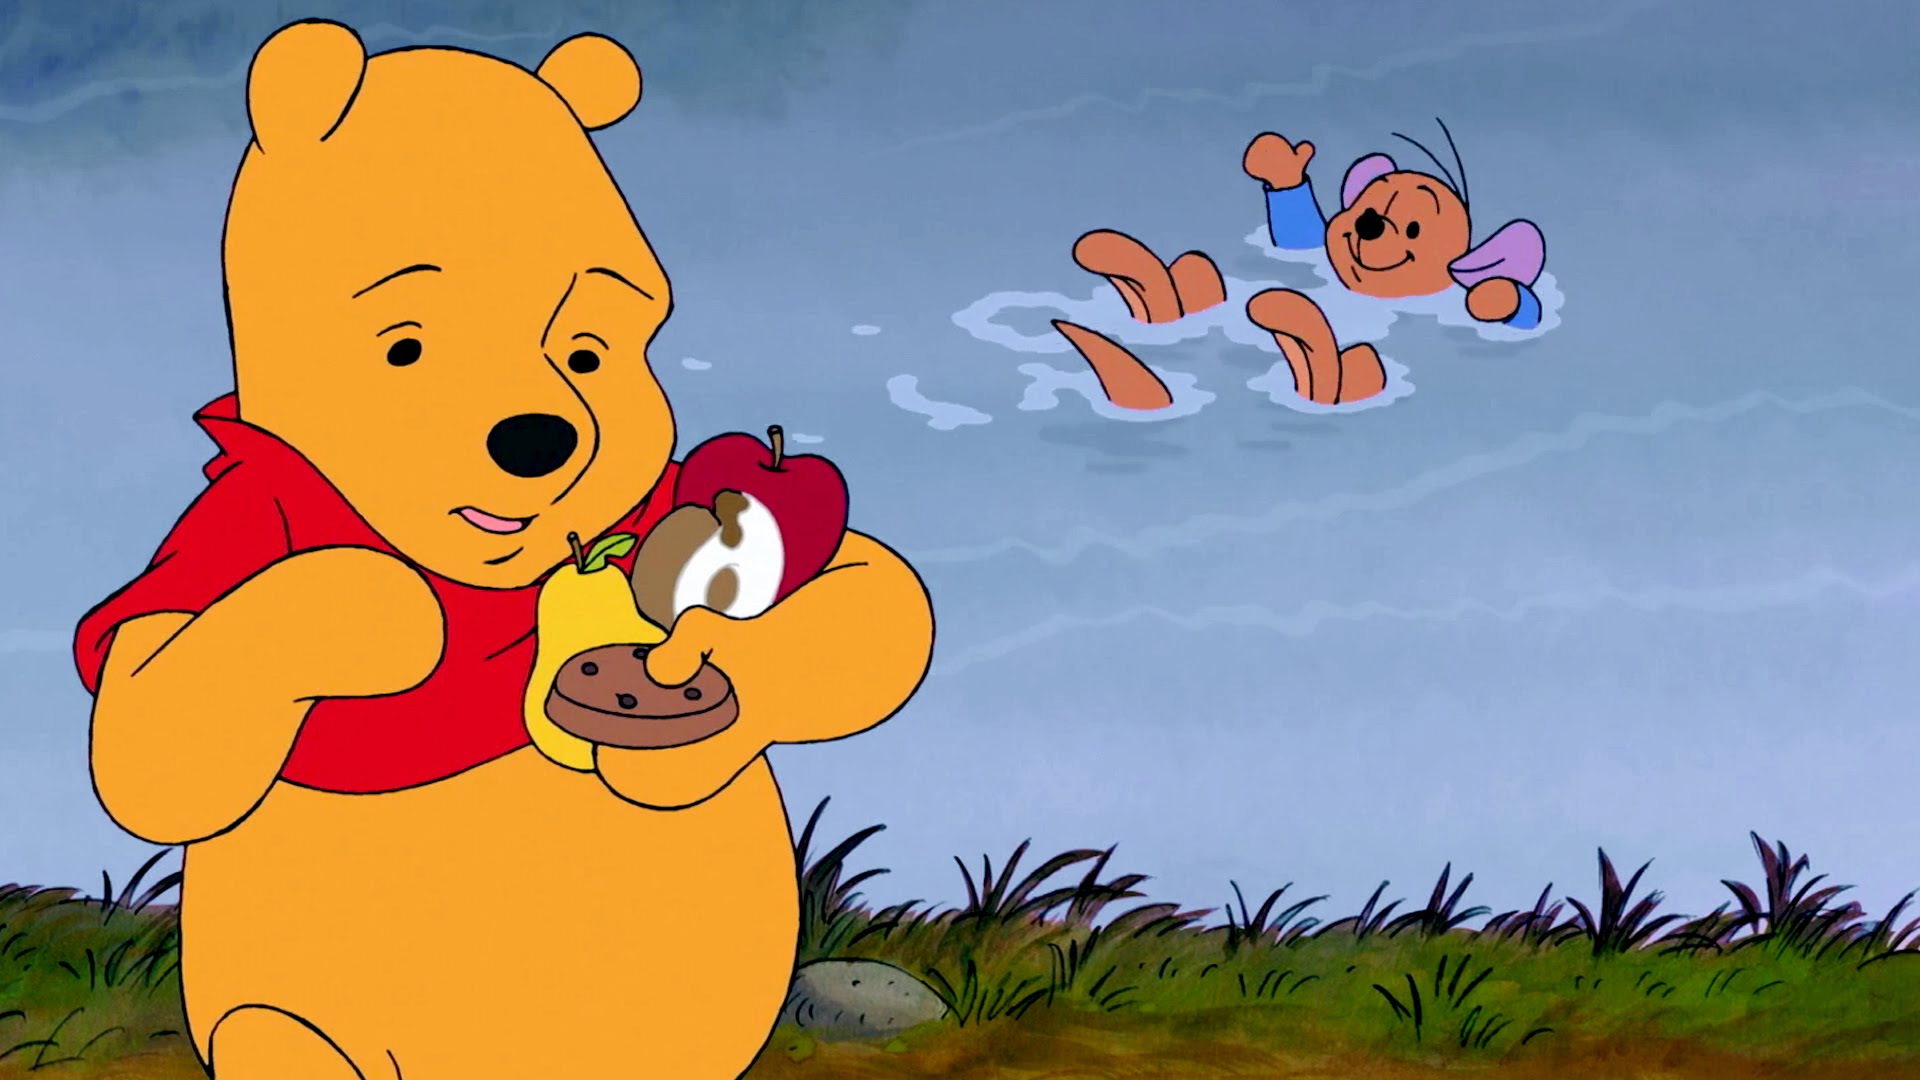 Over time, Pooh's rights were still the subject of commercial quarrels and disputes.  (Walt Disney Pictures/Reproduction)